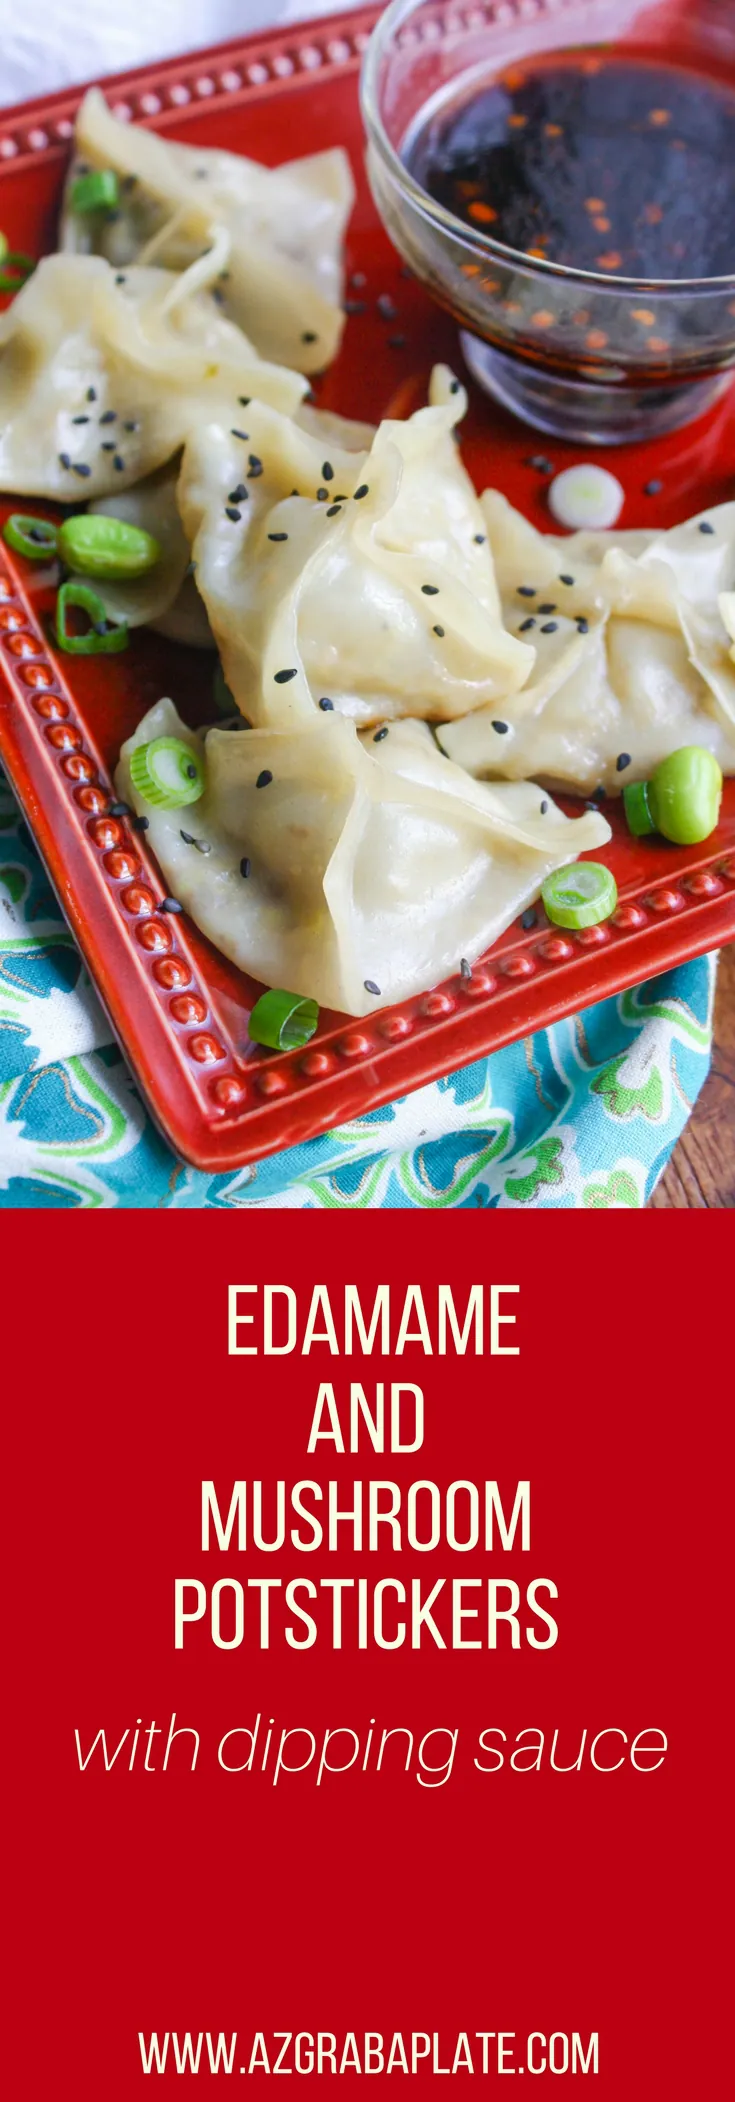 Edamame and Mushroom Potstickers with Dipping Sauce are fun little treats to make any night of the week. These potstickers and dipping sauce are great to serve at parties, too!